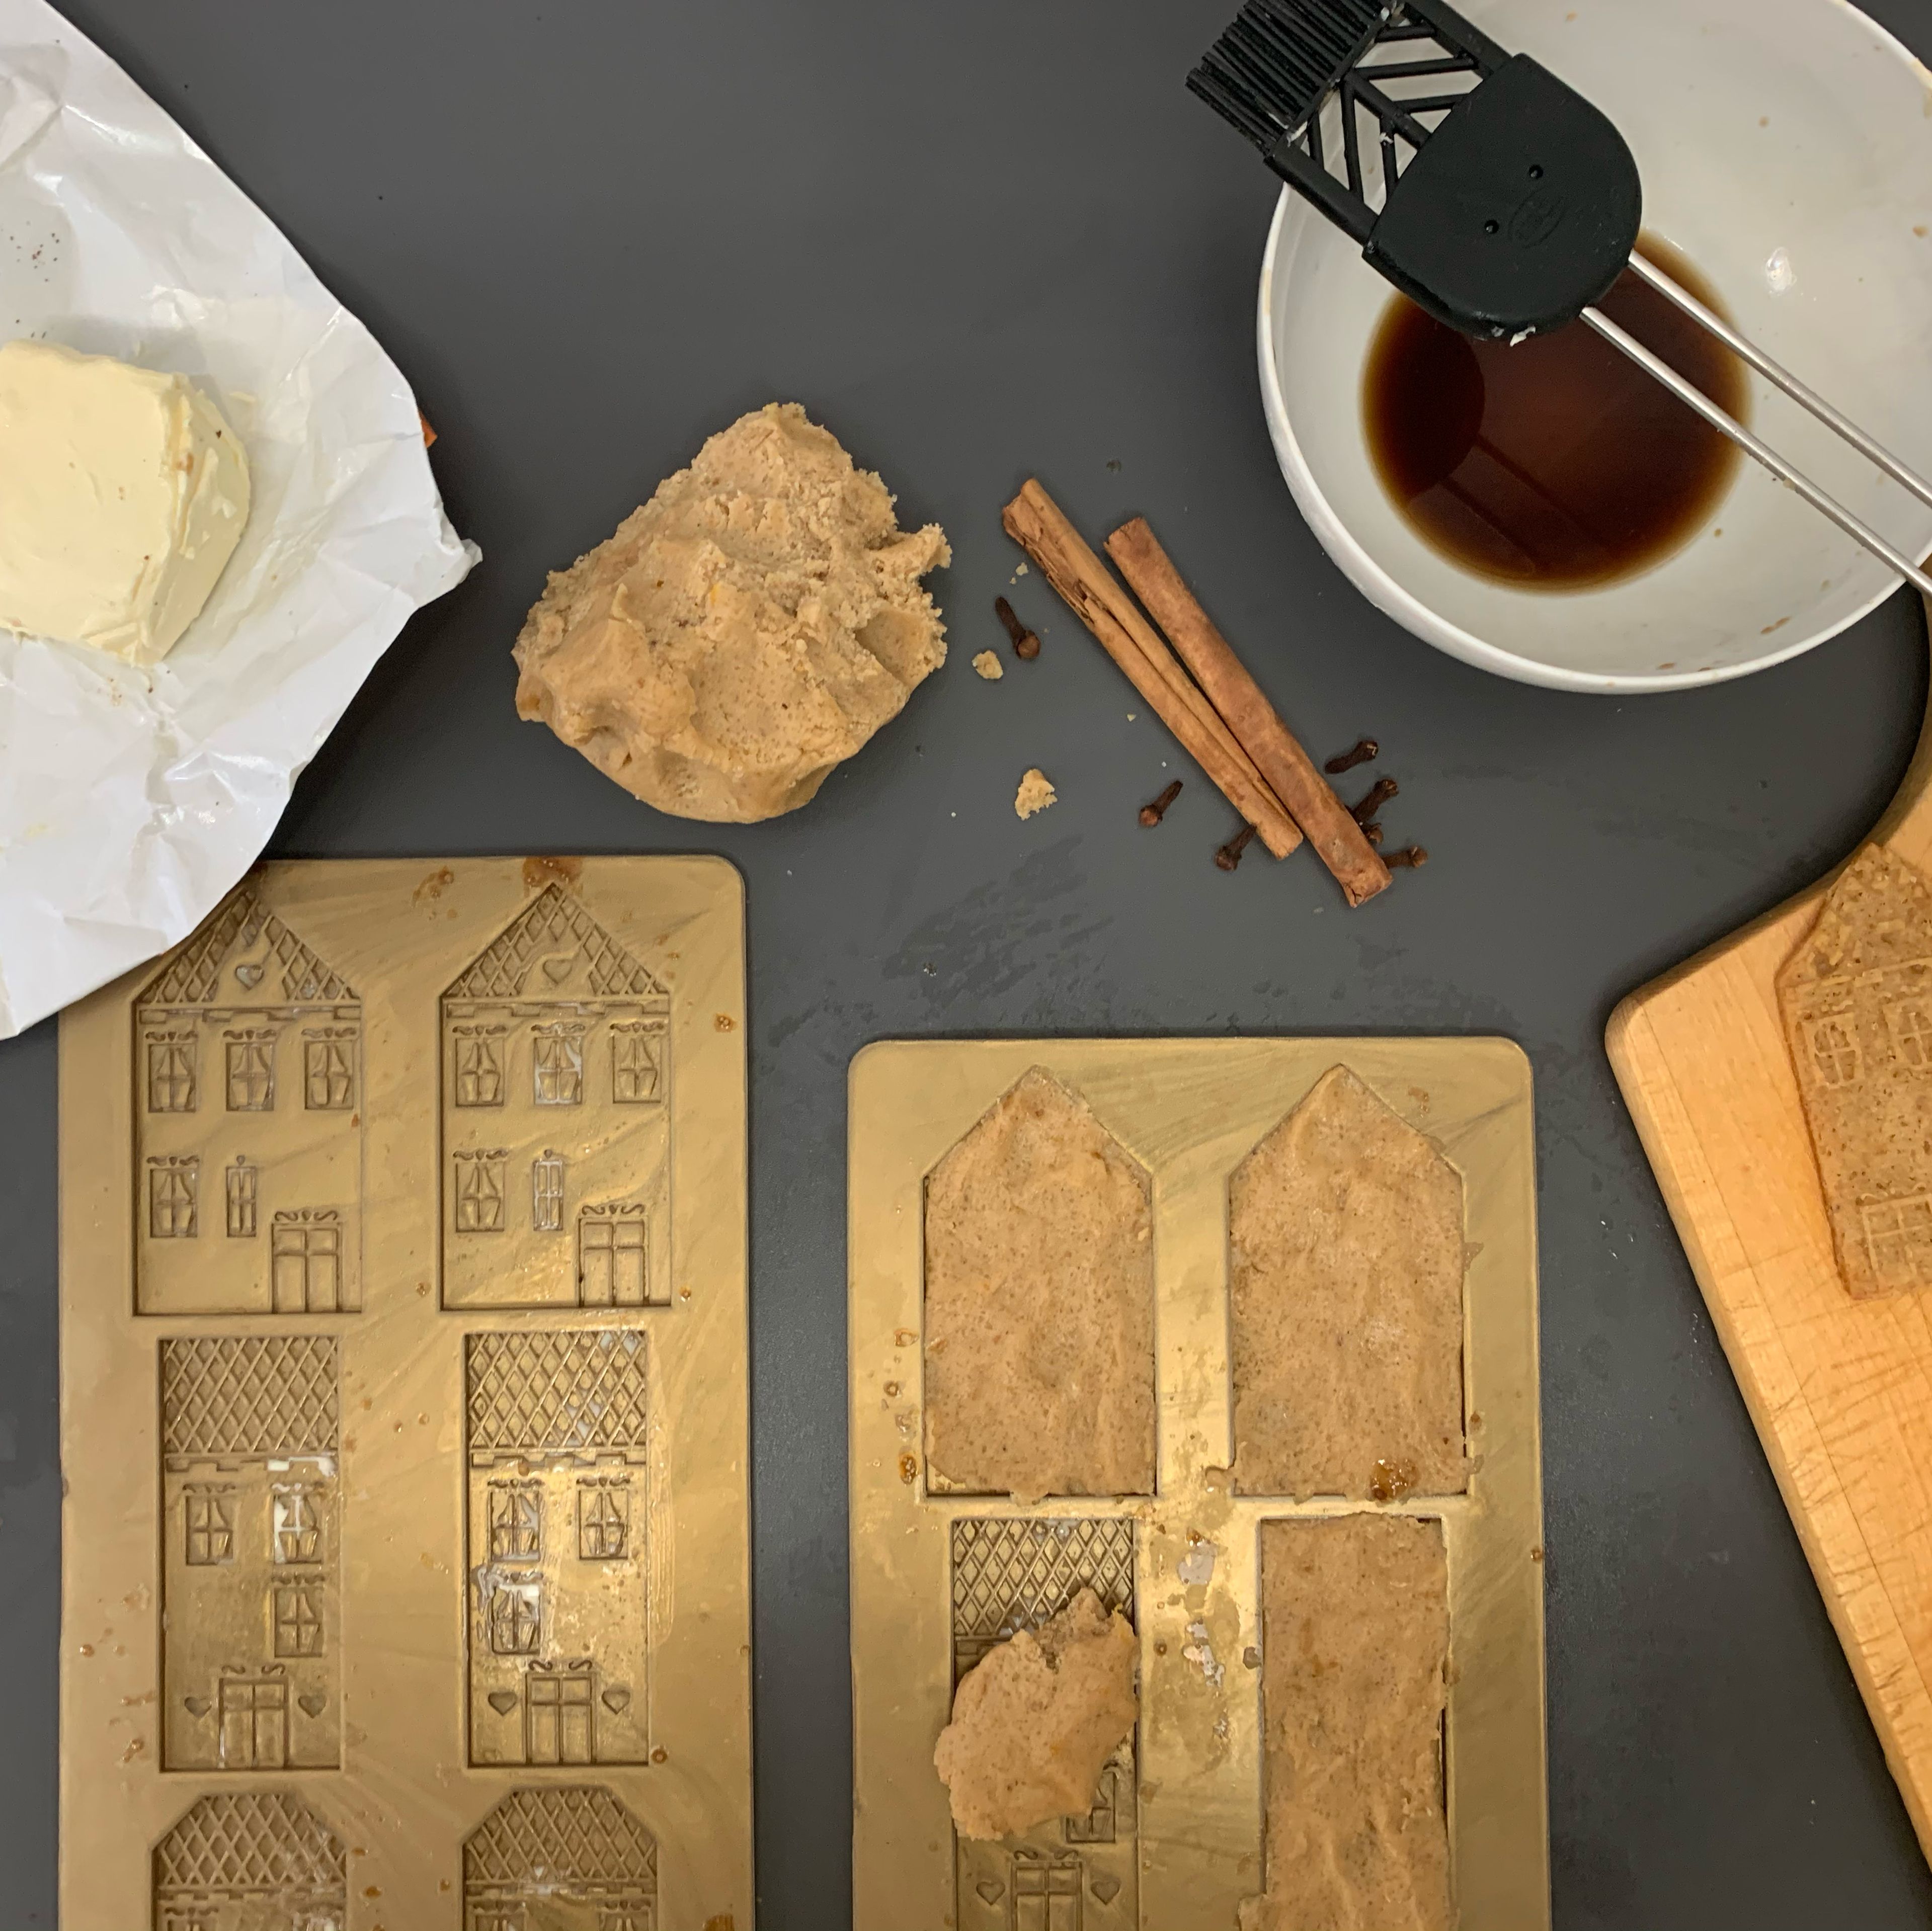 Grease speculaas mould and press the dough in. Brush with sugared water before placing on a lined baking sheet.